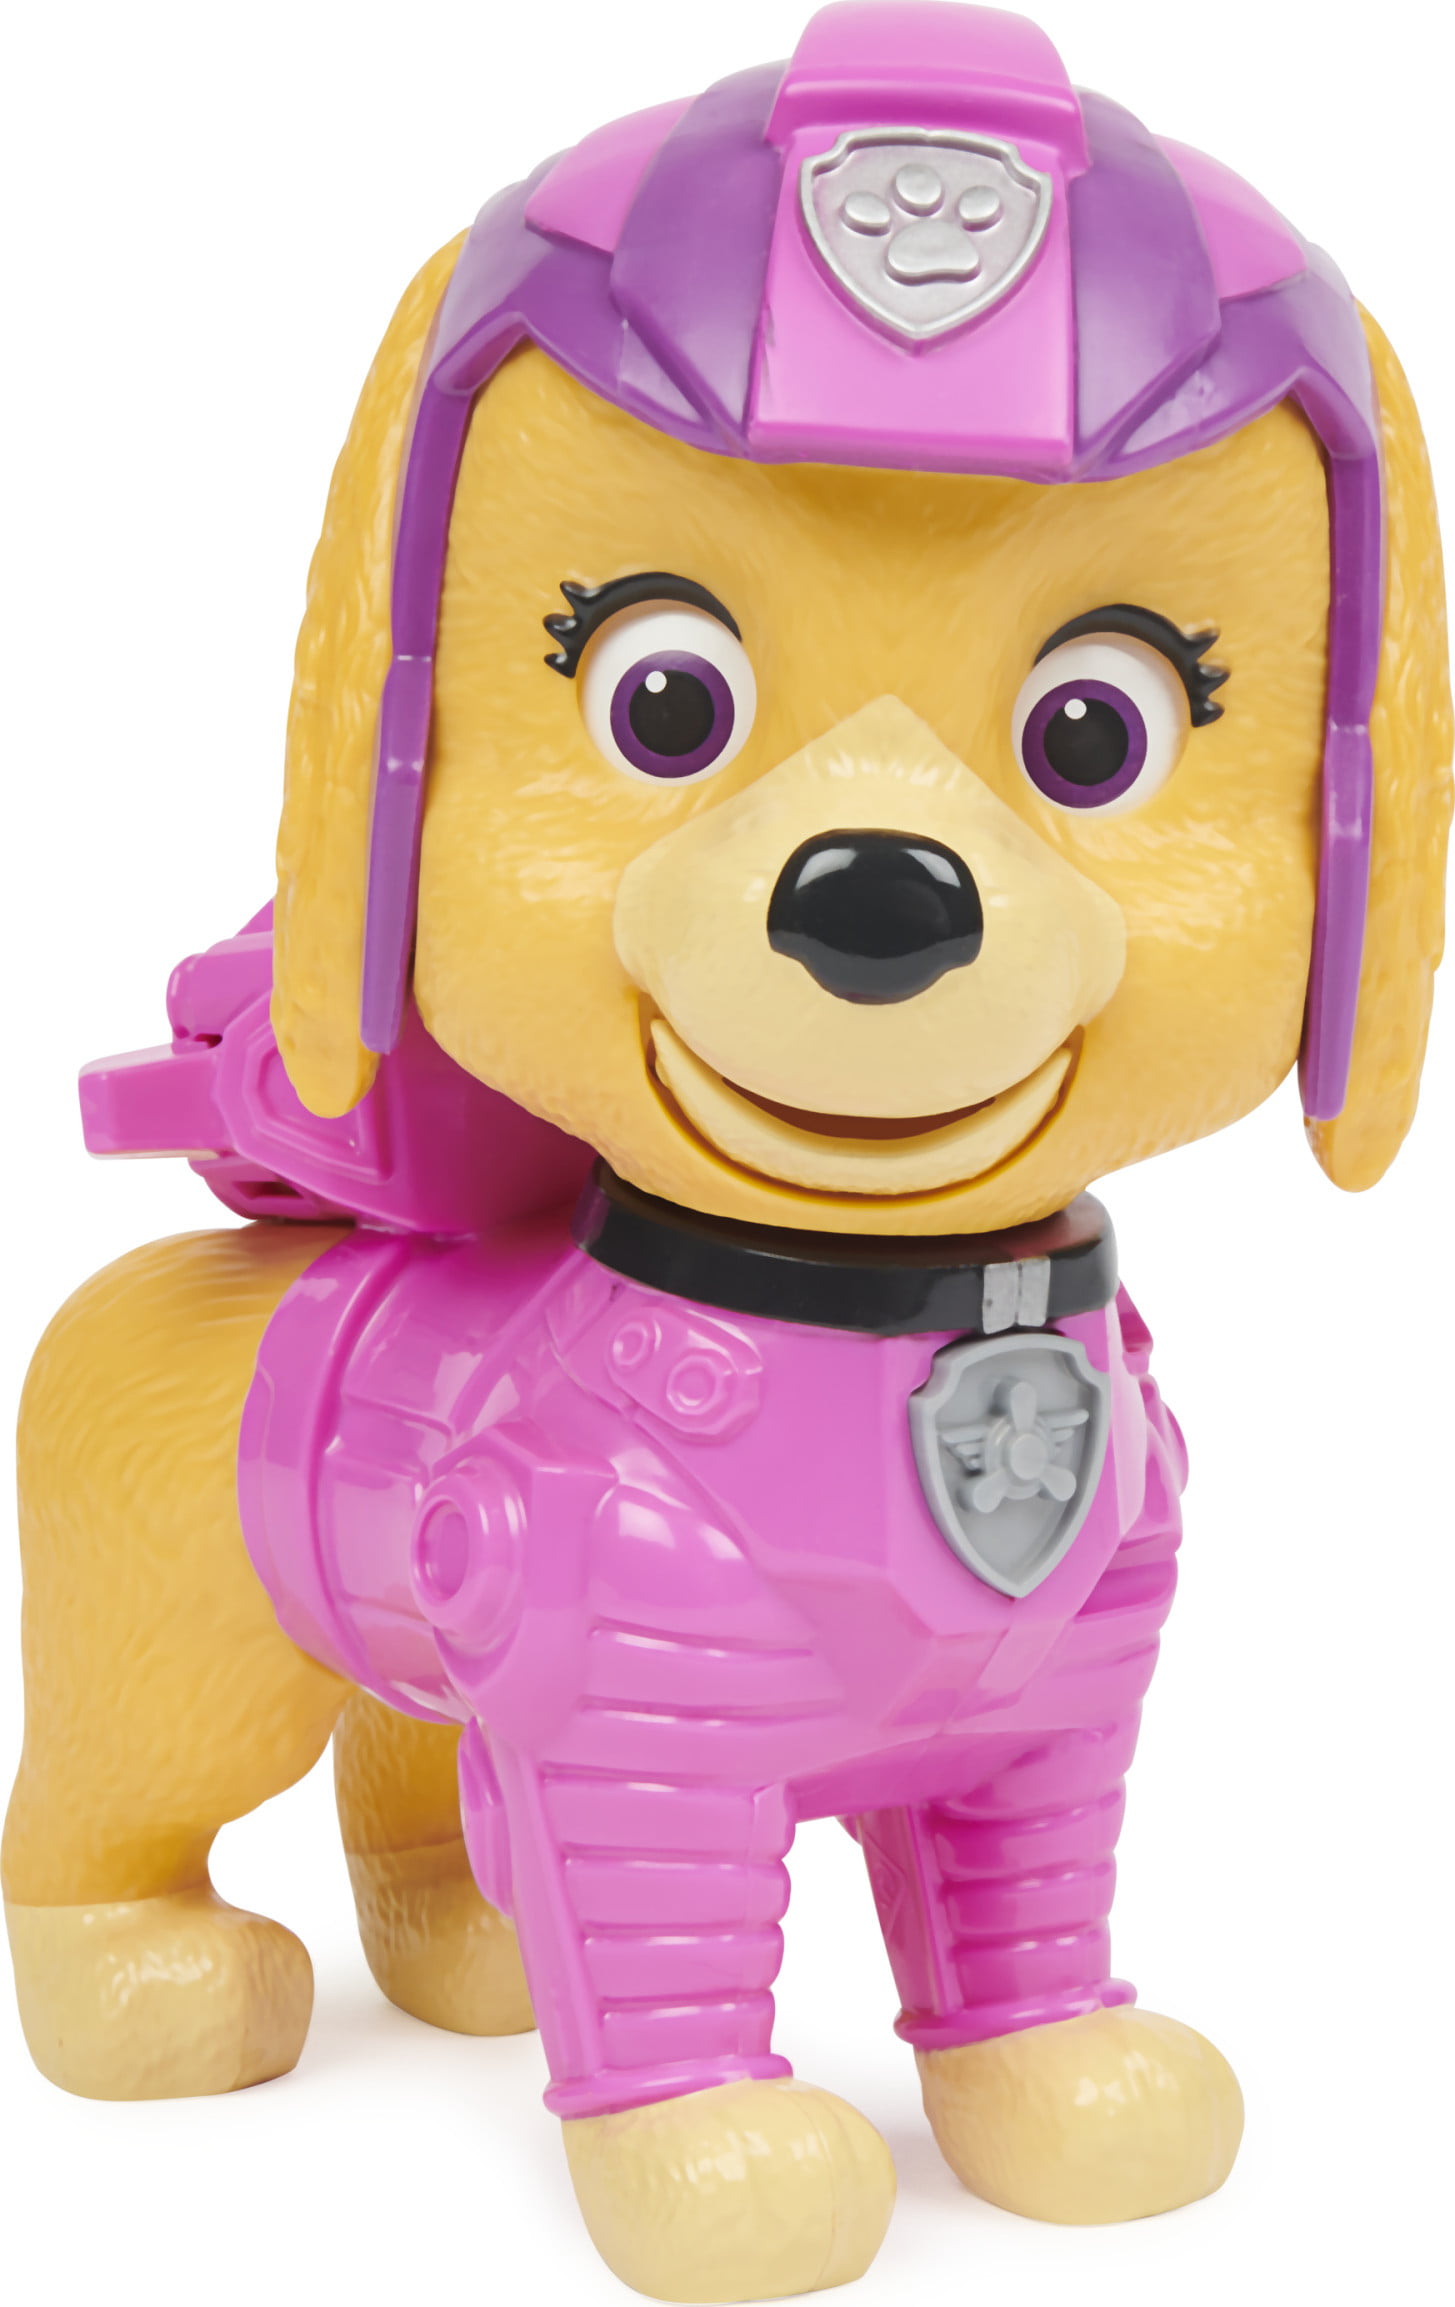 PAW Patrol, Snuggle Up Skye Plush with Flashlight and Sounds, for Kids Aged 3 Up - Walmart.com